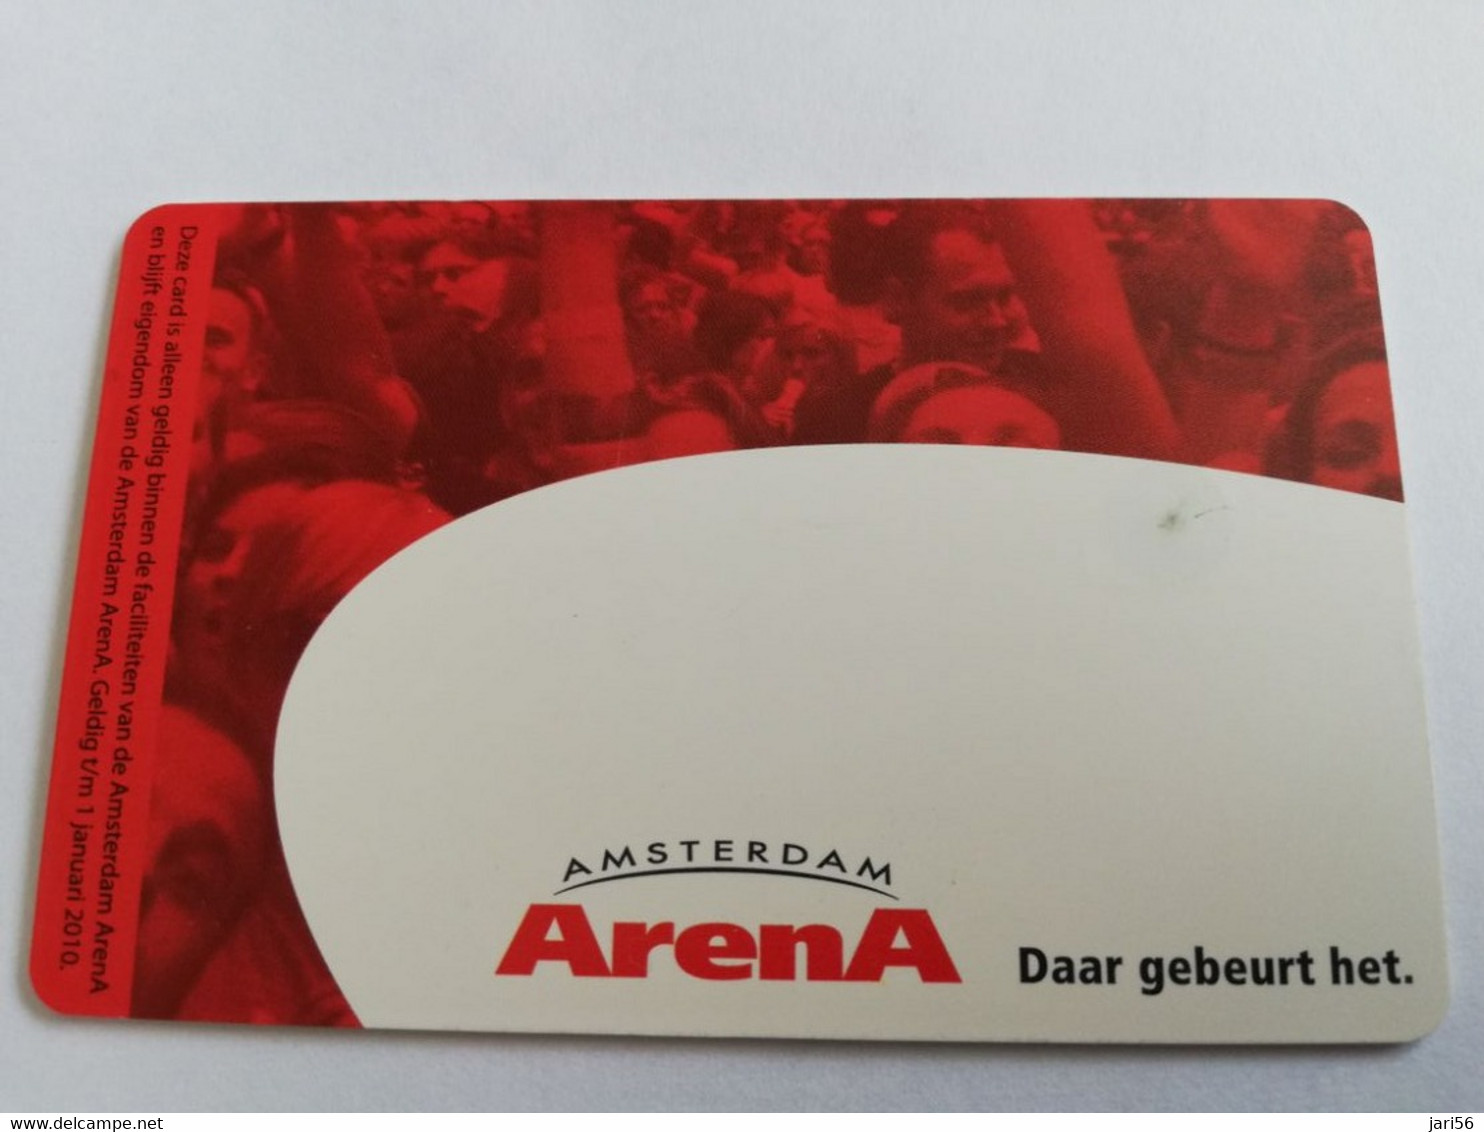 NETHERLANDS CHIPCARD €10,- ARENA CARD / BON JOVI /THE LOST HIGHWAY LEADS TO AMSTERDAM   /MUSIC   - USED CARD  ** 9455** - öffentlich